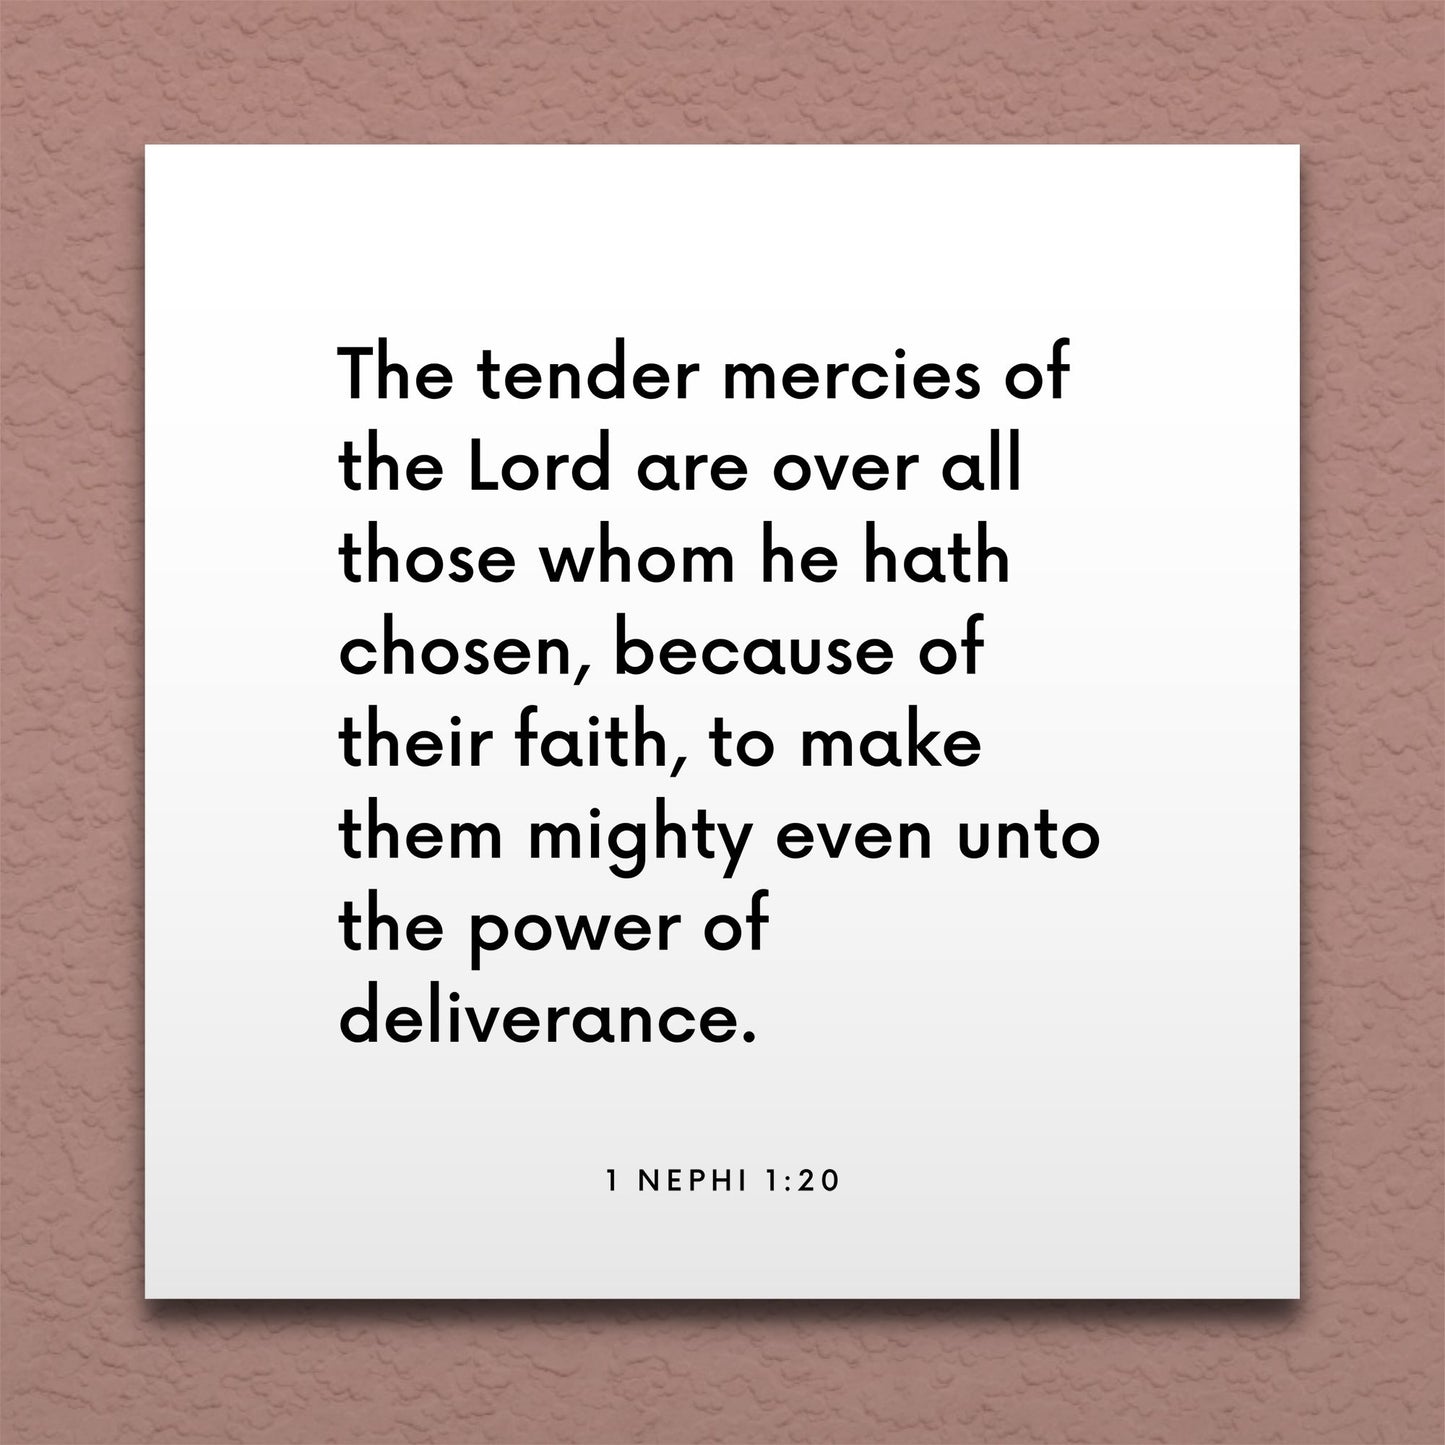 Wall-mounted scripture tile for 1 Nephi 1:20 - "The tender mercies of the Lord are over all"